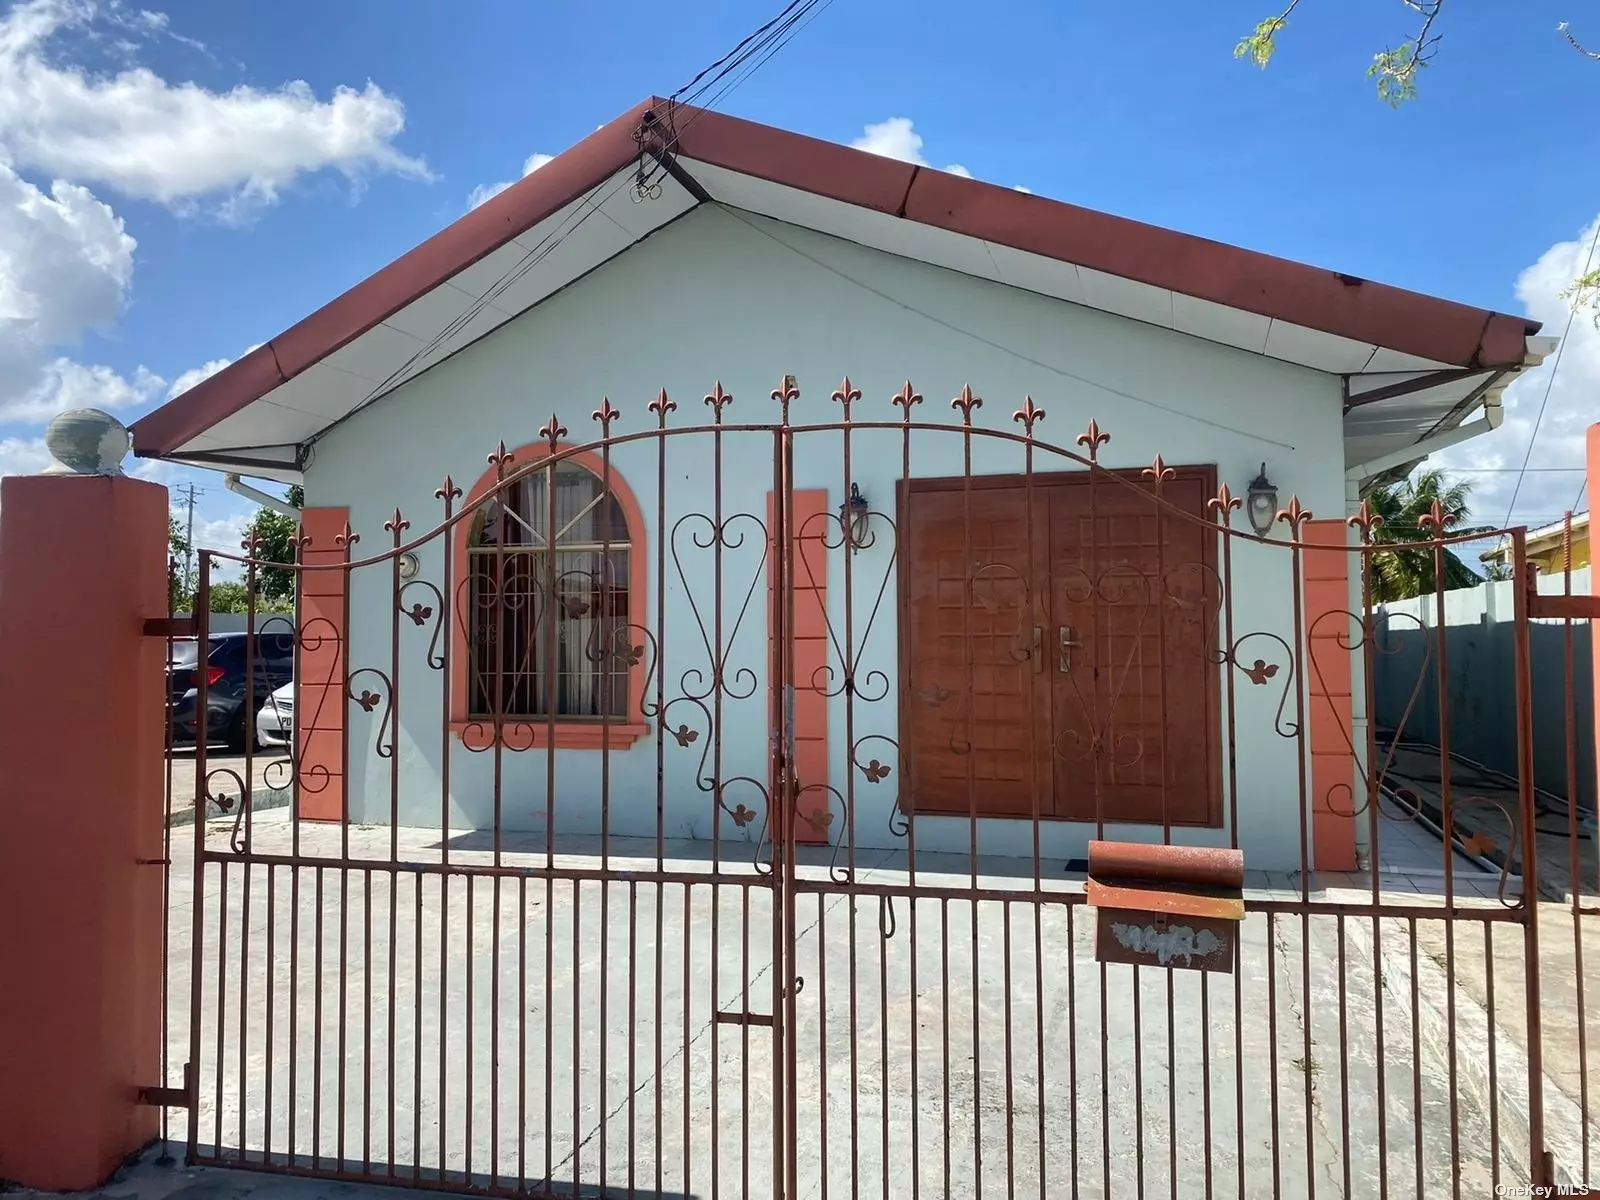 Make this beautiful bungalow your new home! Located at 194 Aberdeen Park, East Edinburg Gardens, Chaguanas Trinidad. Spacious 3 Bedrooms, 2 full bathrooms, 2 kitchens, 2 Living rooms, 2 dining rooms can be home to made into 2 apartments. The perfect mother/daughter home or great rental income.